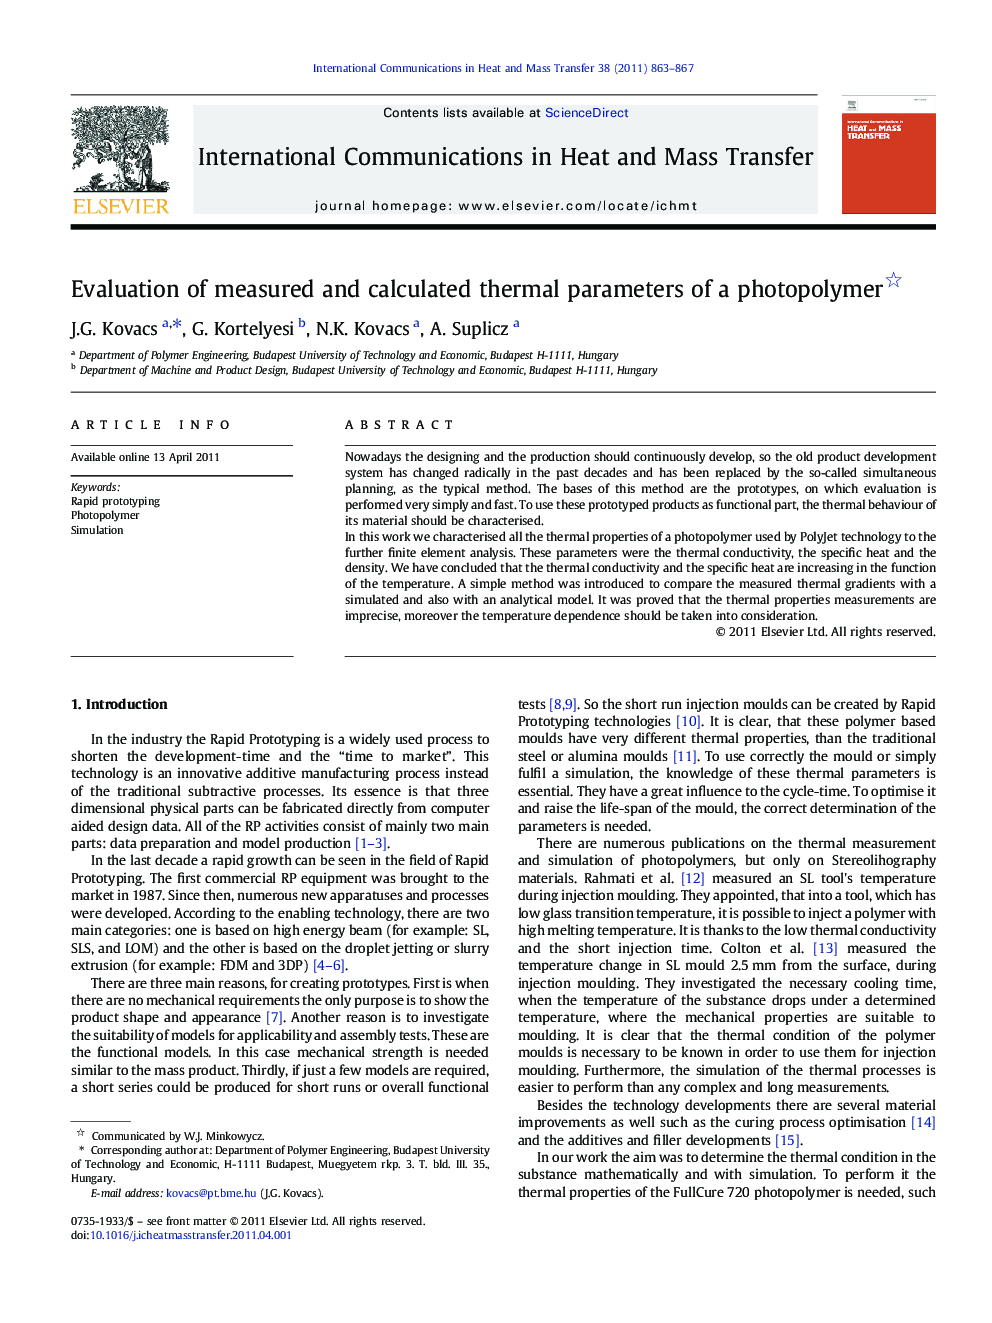 Evaluation of measured and calculated thermal parameters of a photopolymer 